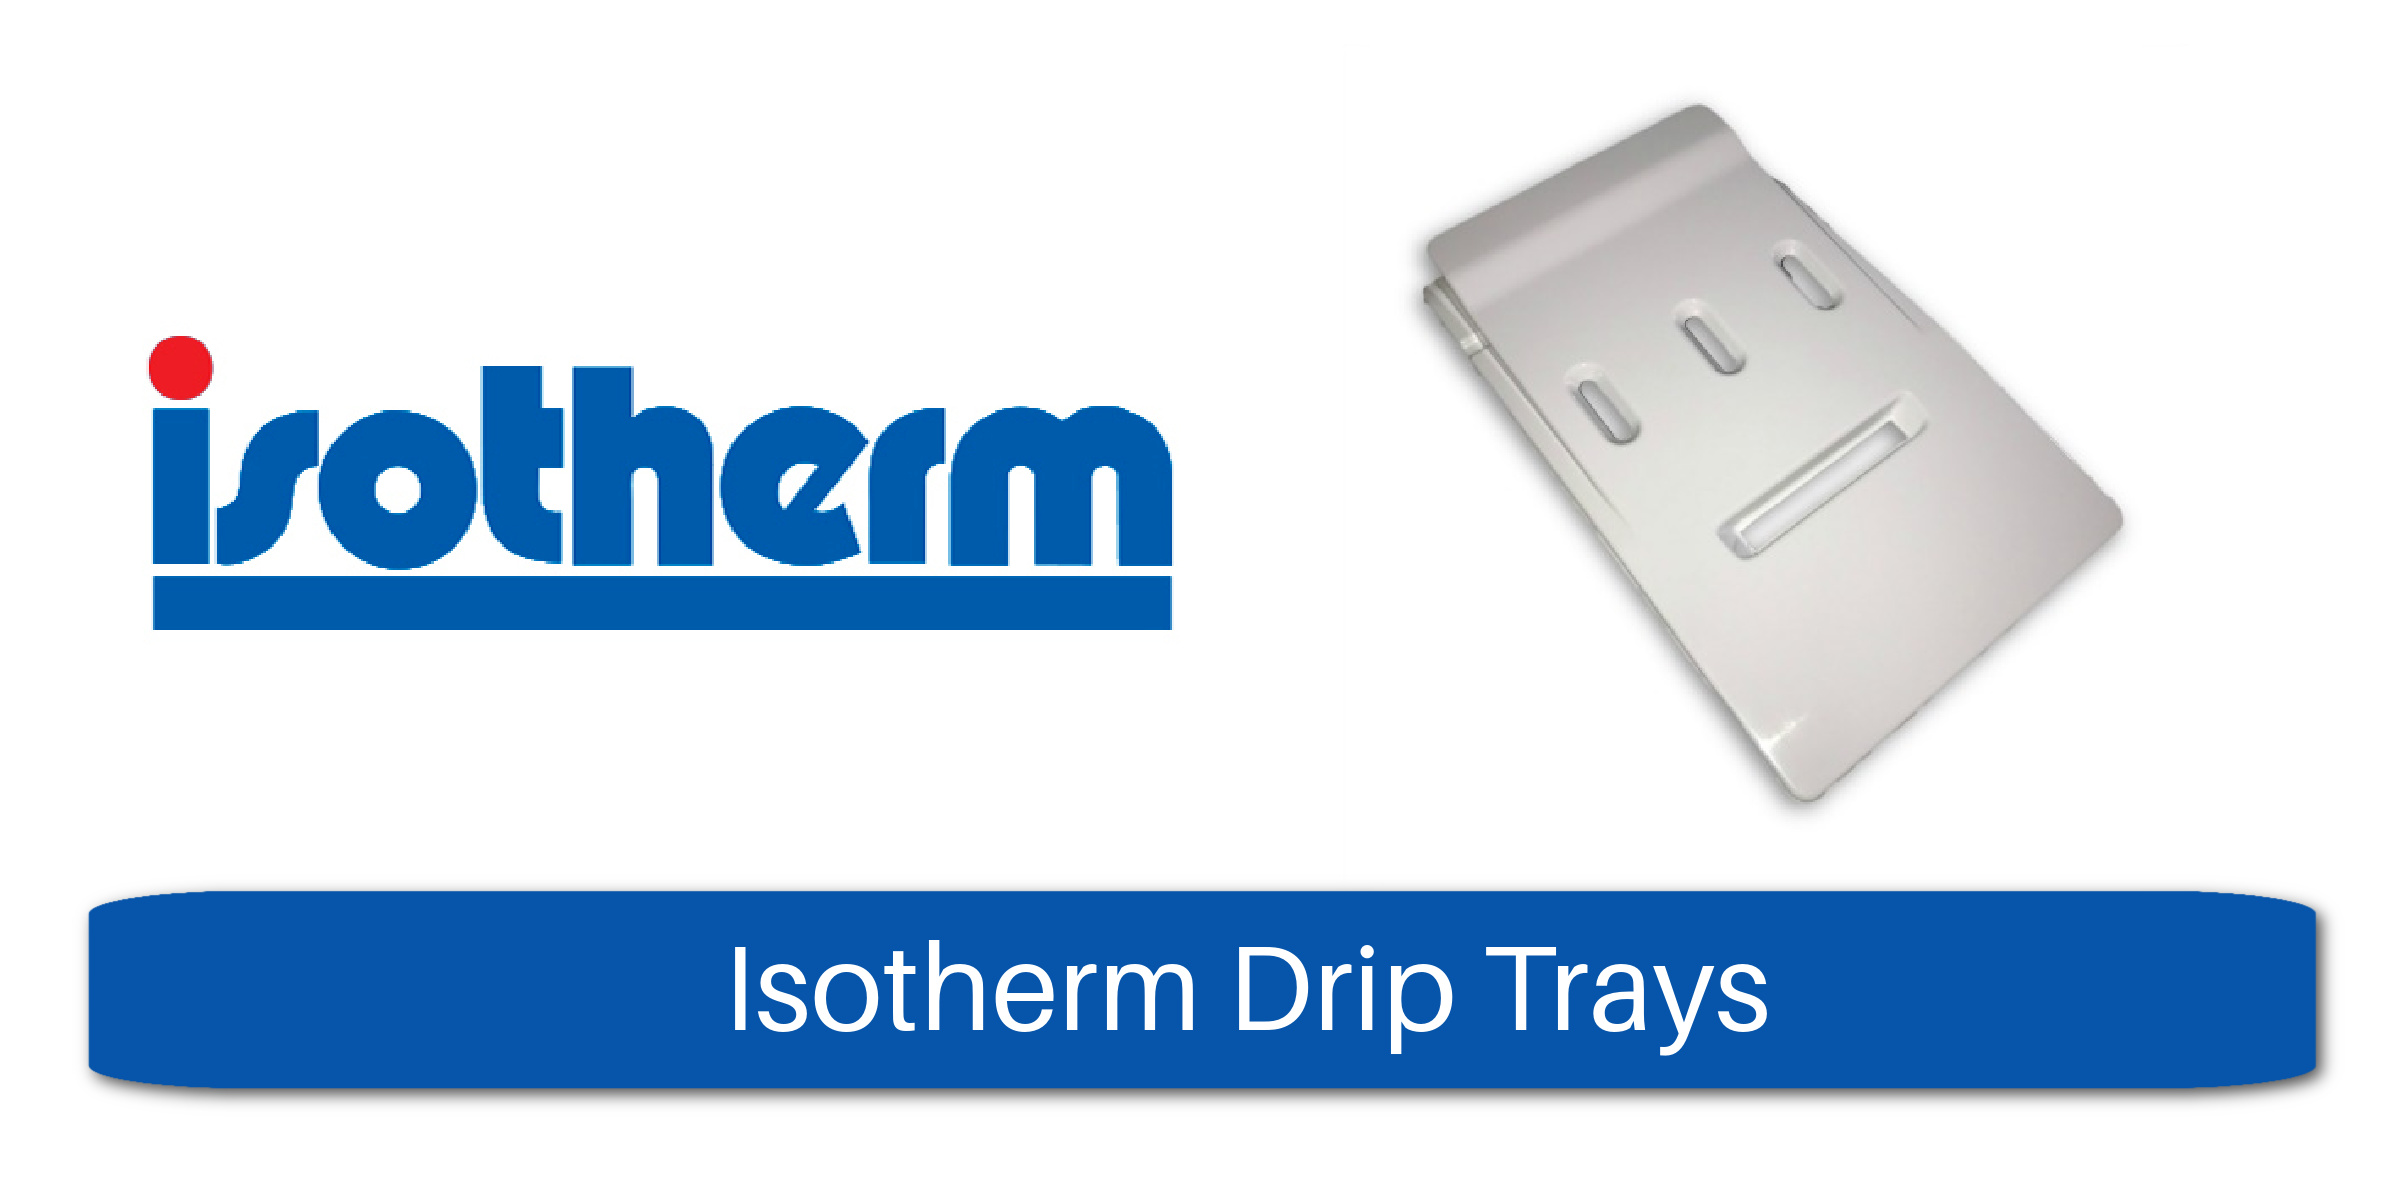 Isotherm Drip Trays